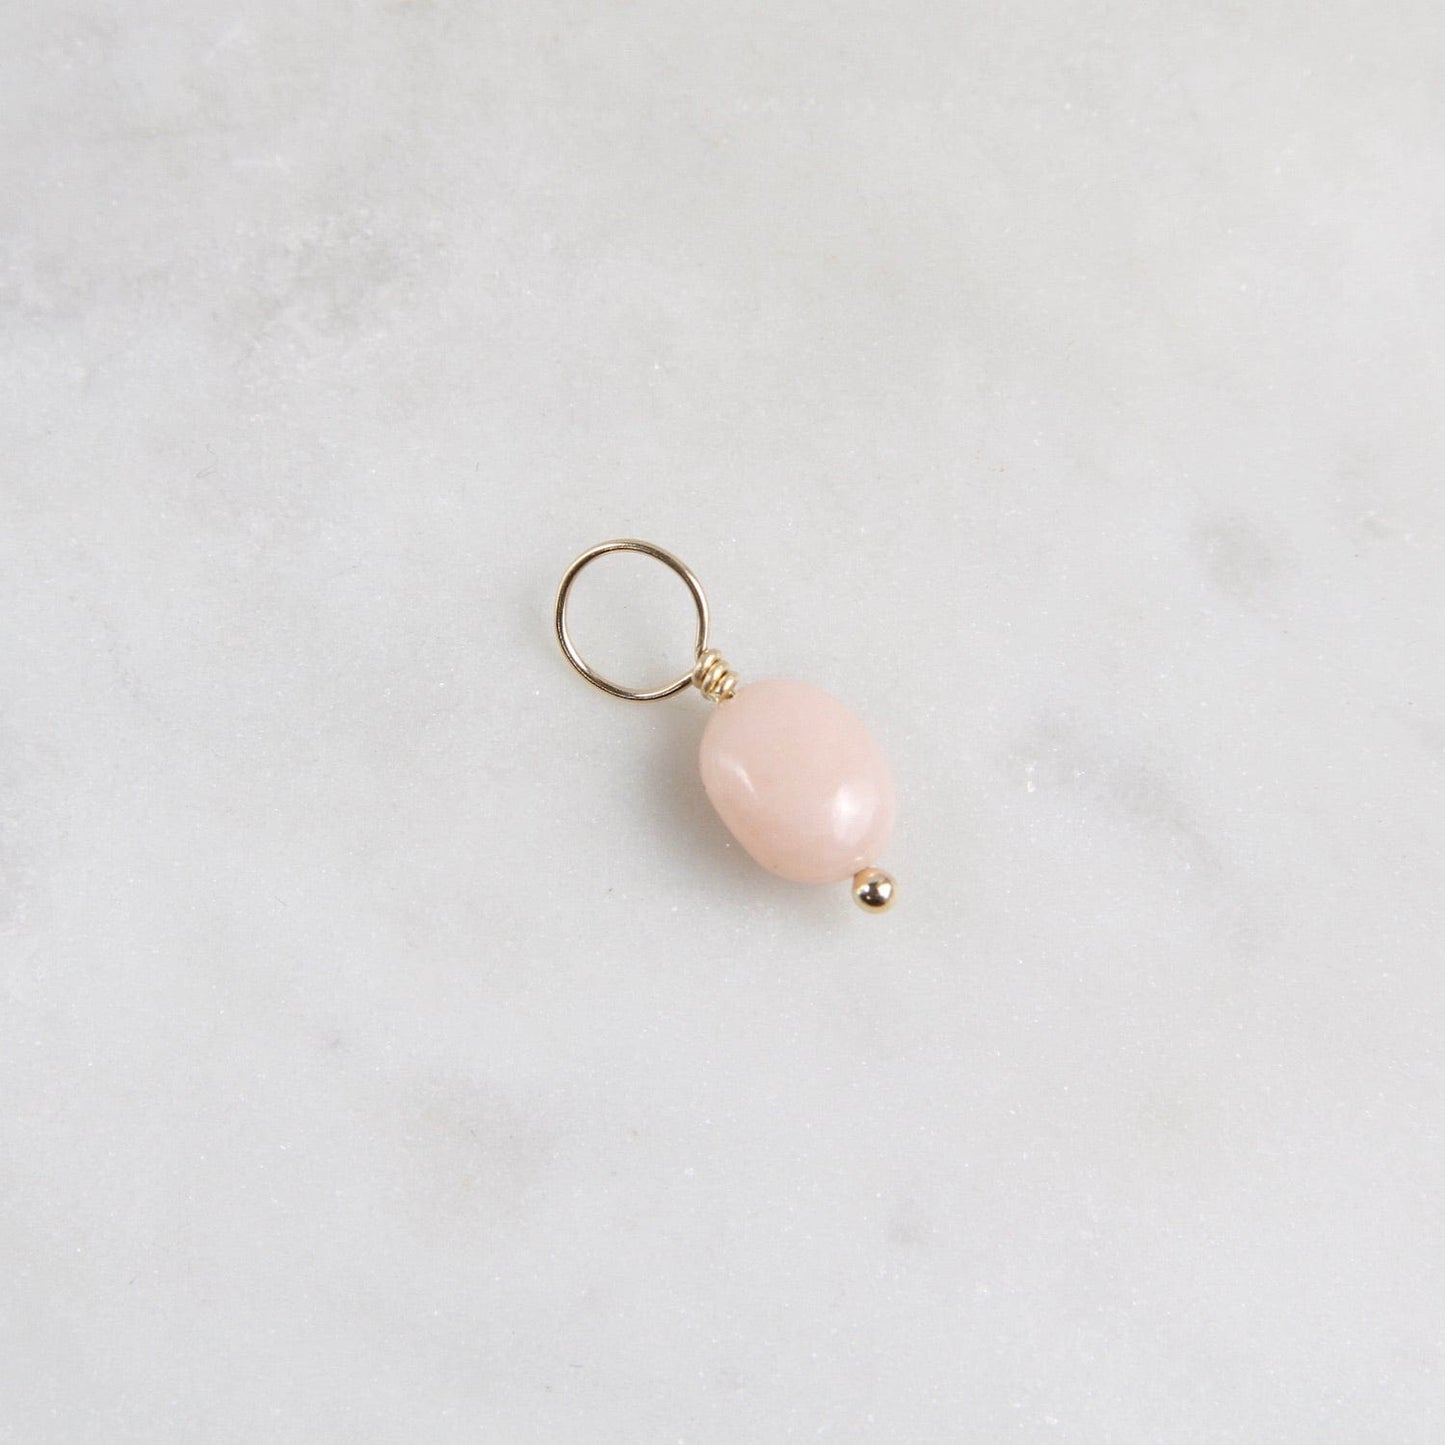 CHM Pink Opal - Unfaceted Oval Gemstone Charm